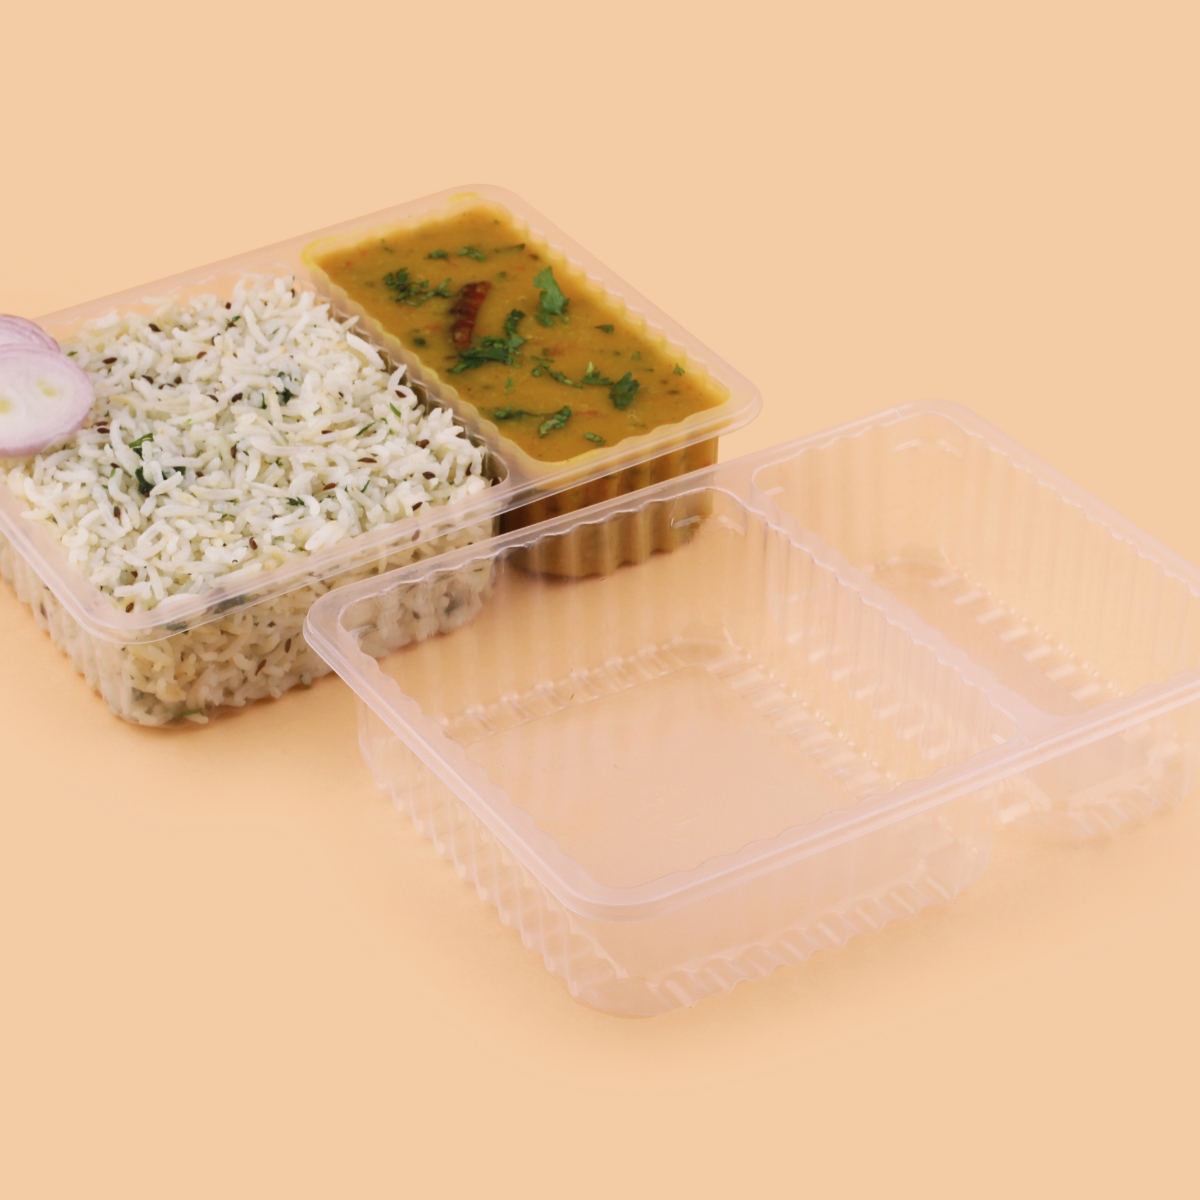 https://www.prithvipolymer.com/images/products/pp-meal-box/2-cp-tray.jpg